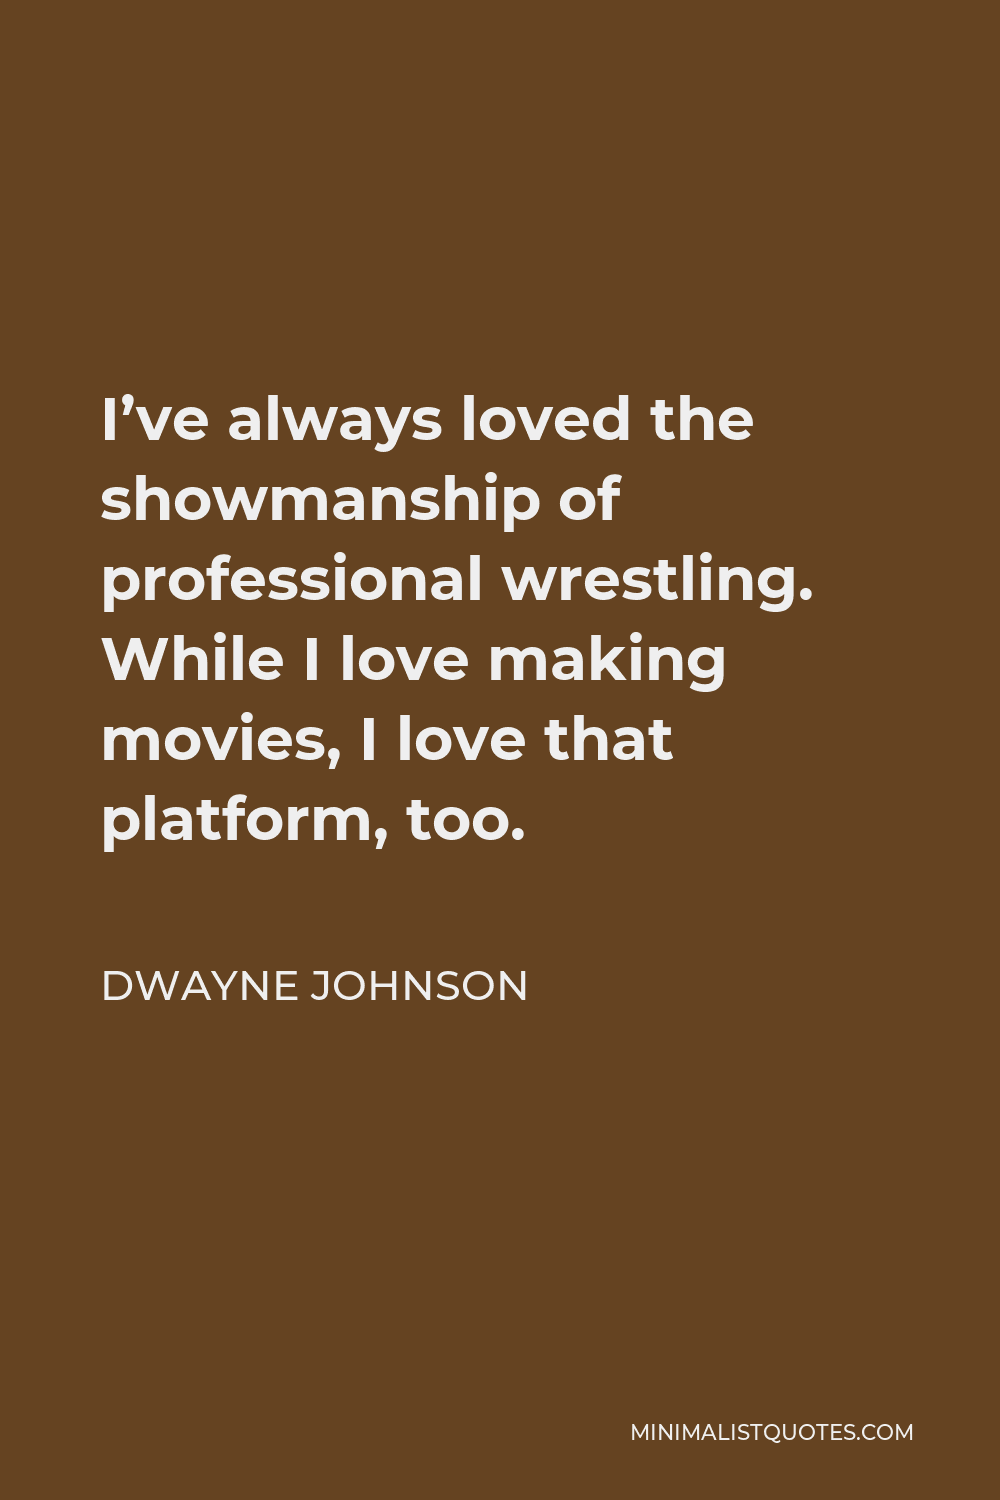 Dwayne Johnson Quote - I’ve always loved the showmanship of professional wrestling. While I love making movies, I love that platform, too.